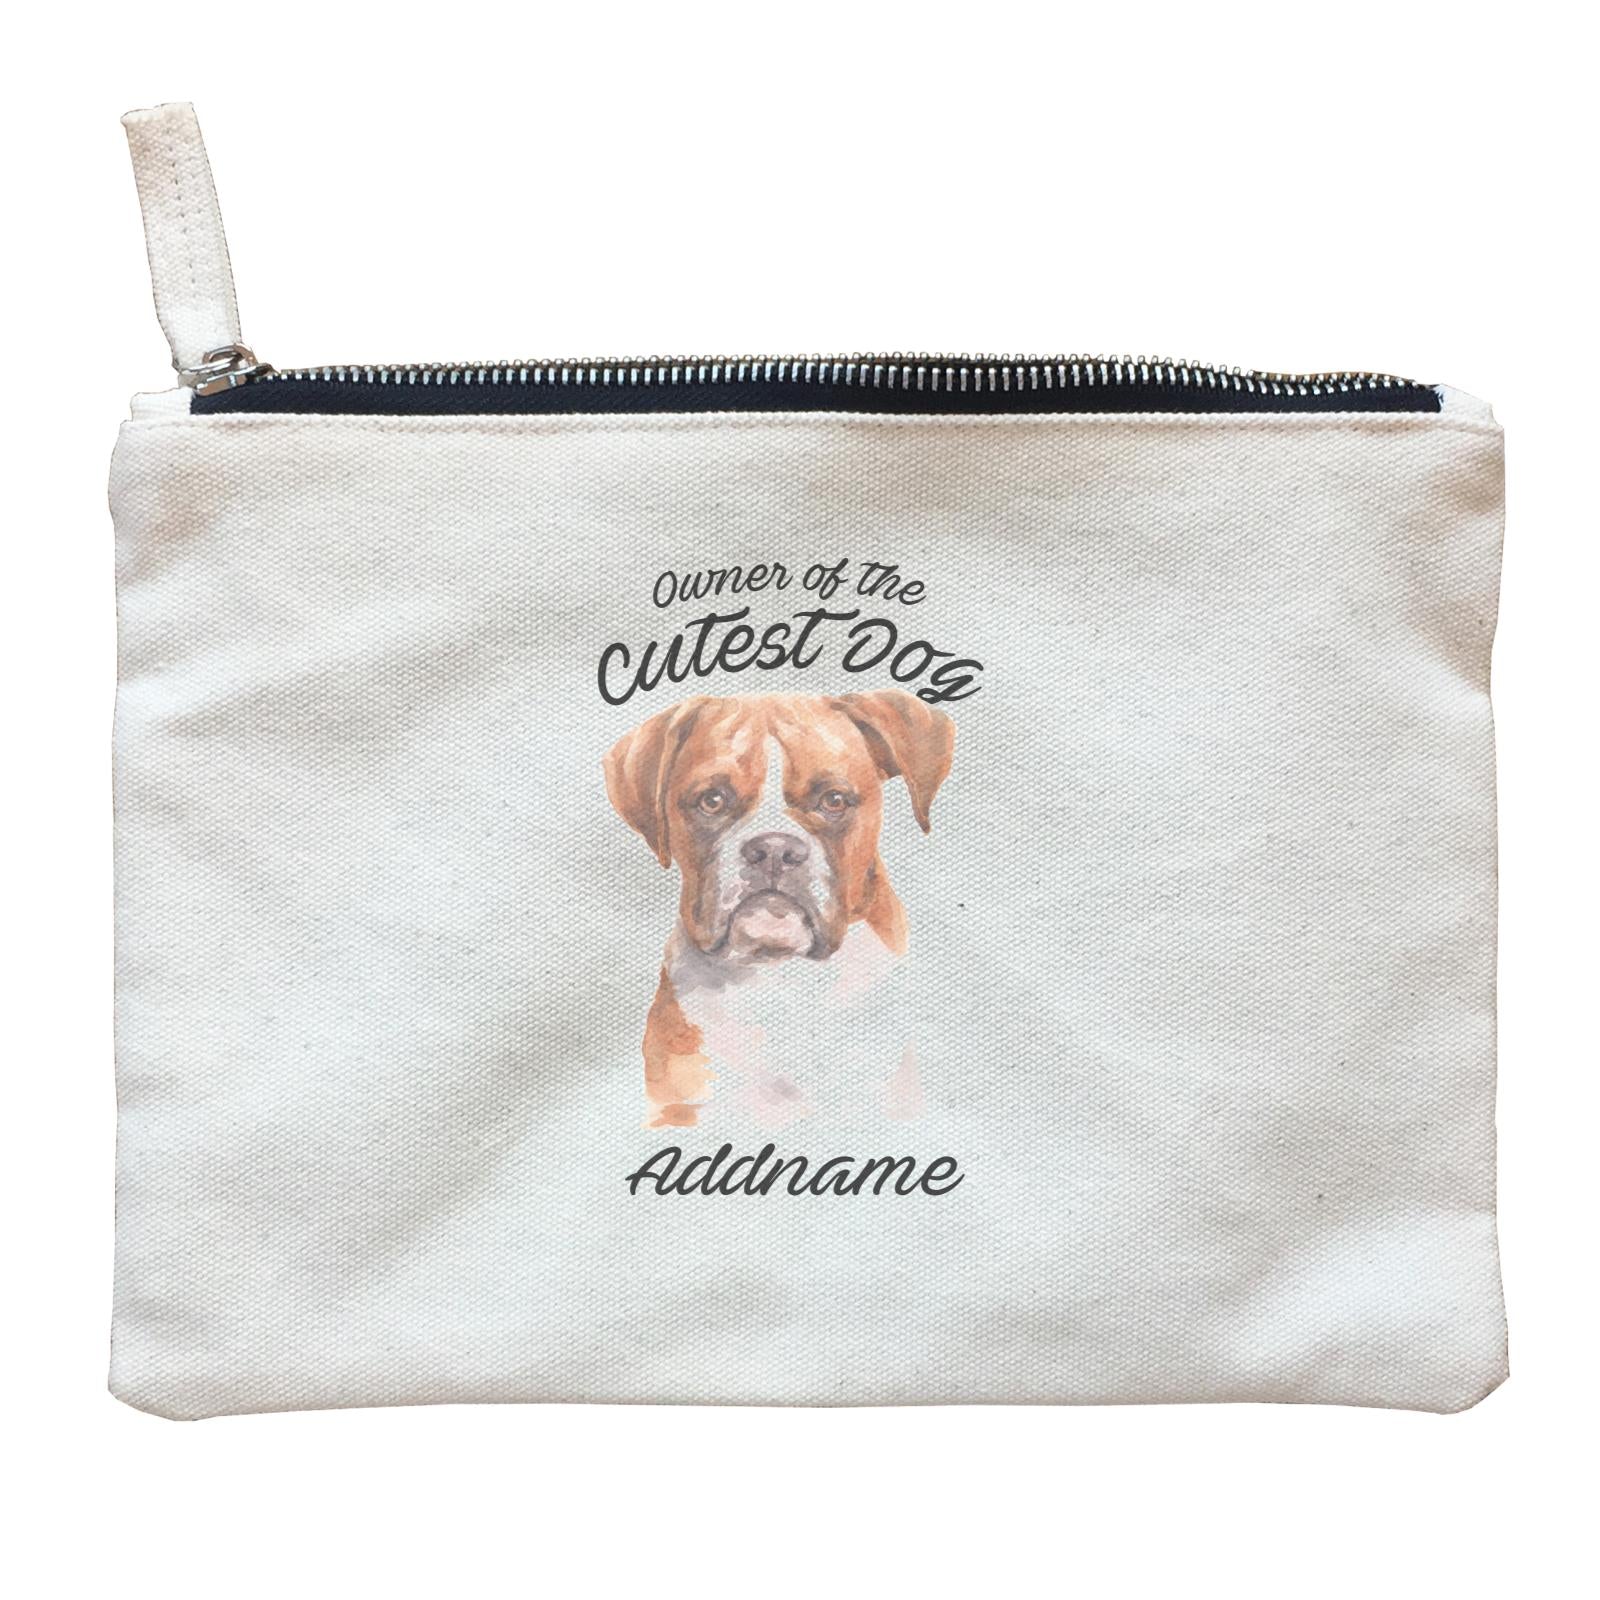 Watercolor Dog Owner Of The Cutest Dog Boxer Brown Ears Addname Zipper Pouch